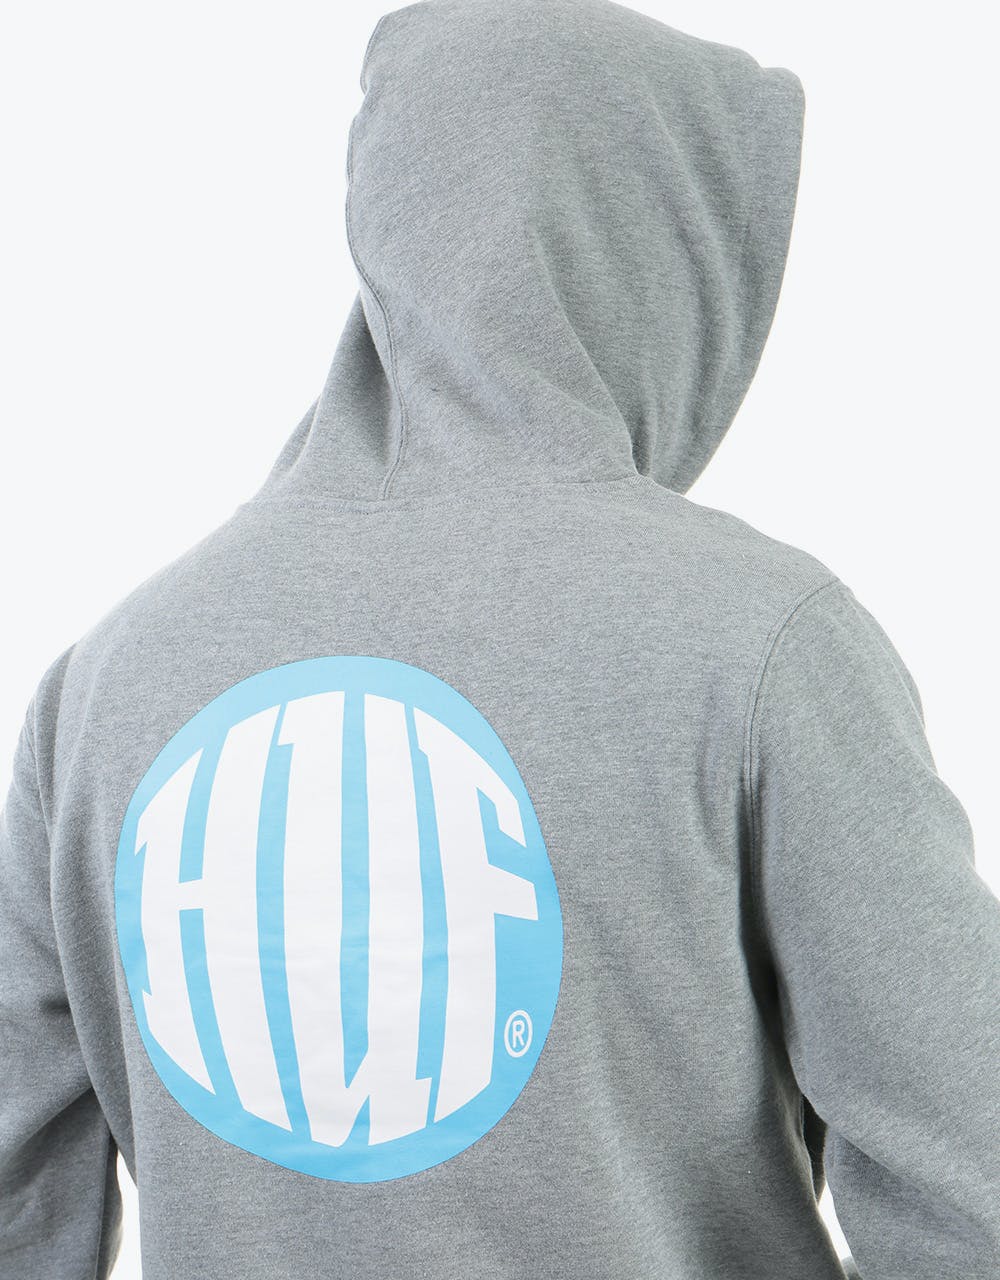 HUF High Definition Pullover Hoodie - Grey Heather